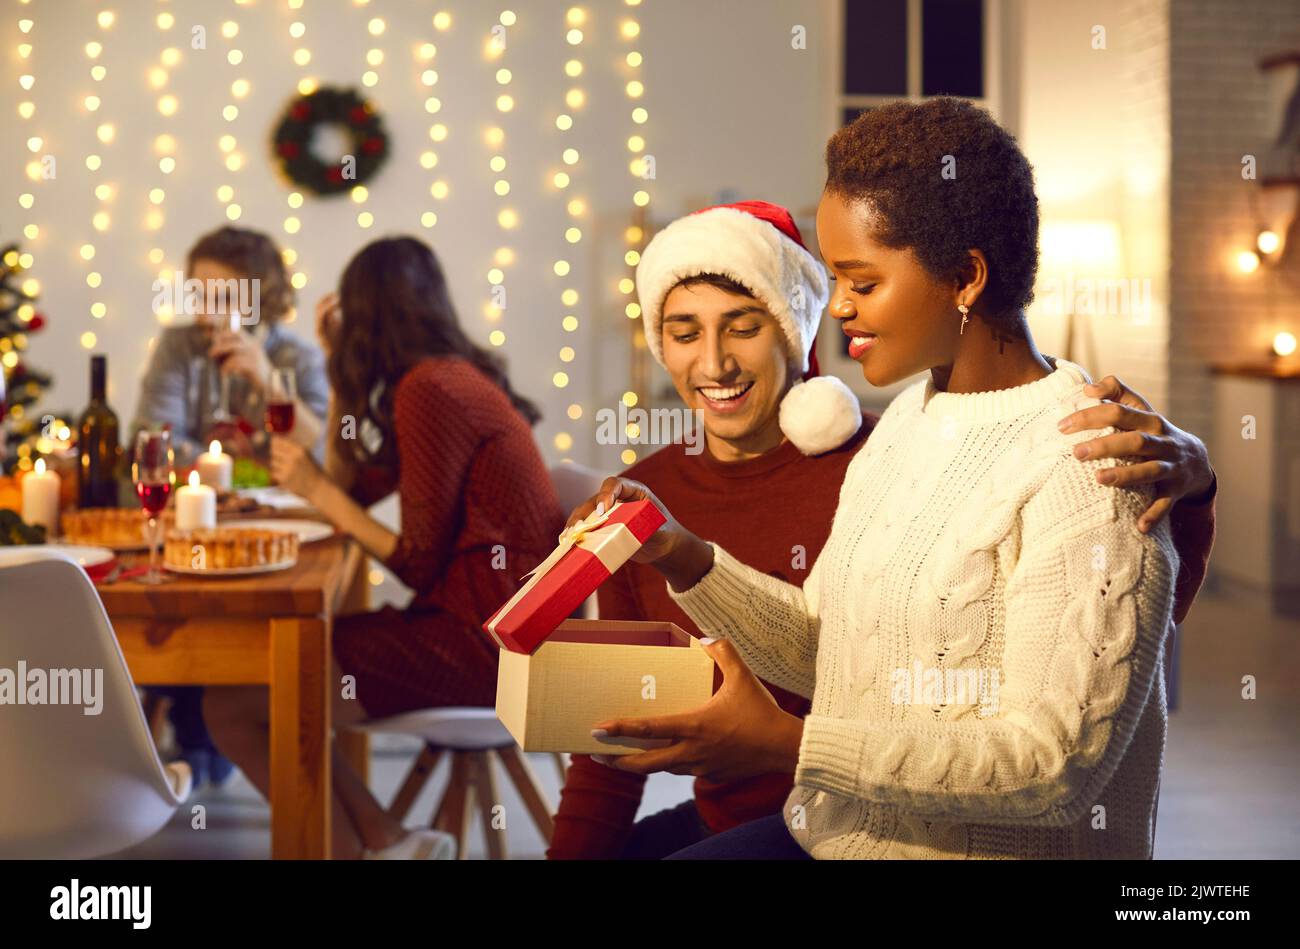 Man surprises his beloved woman by giving her present during family Christmas dinner. Stock Photo